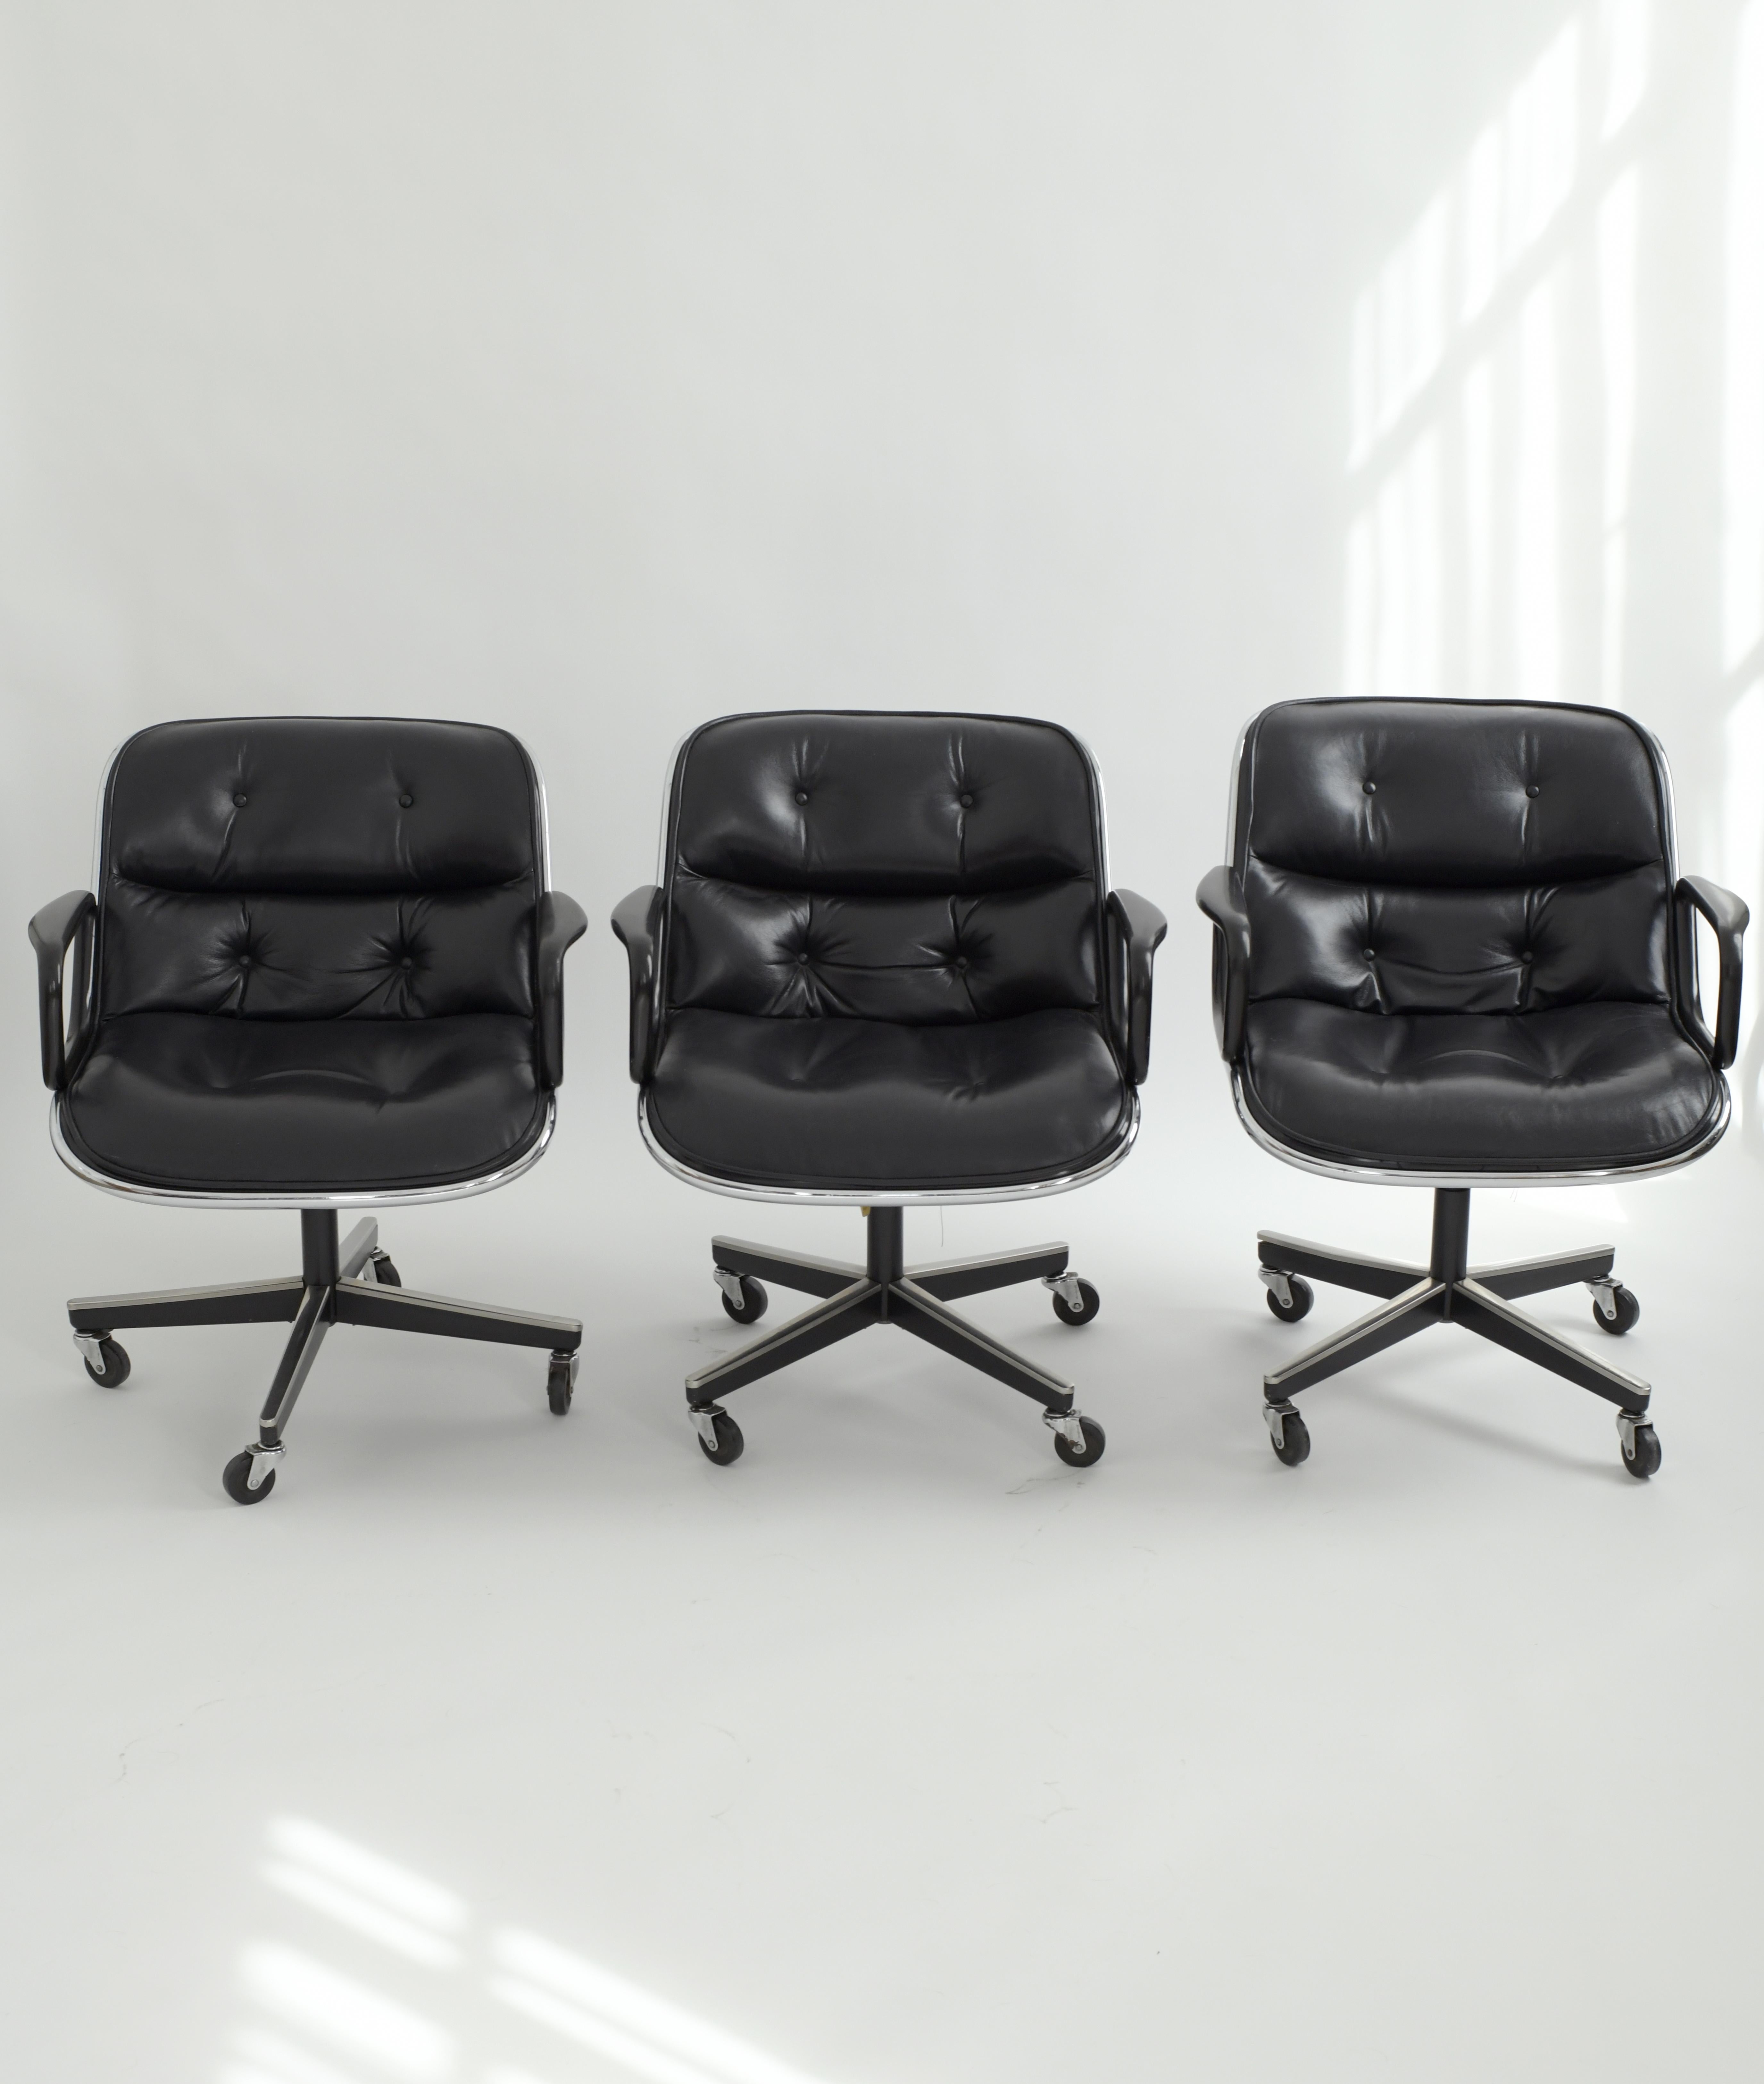 Executive Chairs by Charles Pollock for Knoll in black leather. These beautiful black leather executive chairs are incredibly comfortable and will look great in any office. This set was produced in 1981 and considering their age, they are in great